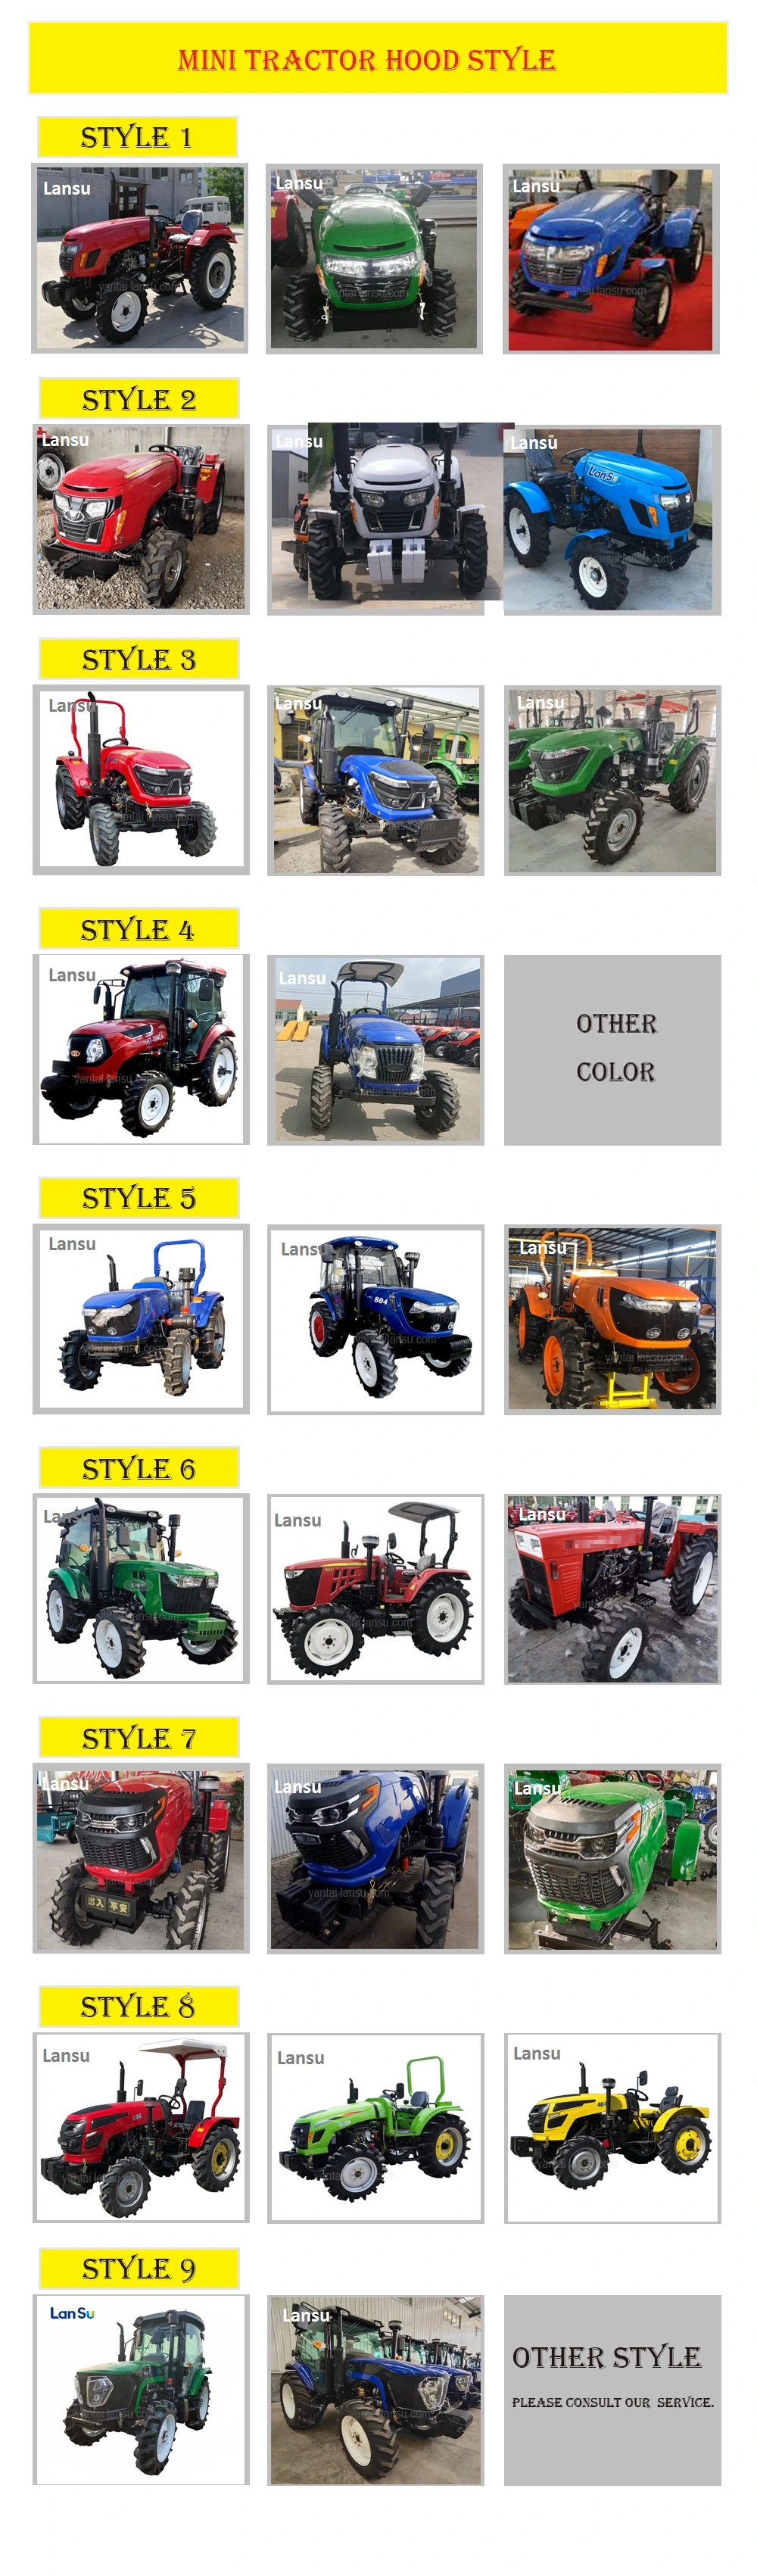 China Products/Suppliers. Manufacturer Supply Big Discount 30HP 40HP 50HP 60HP 70 HP 80HP 90HP 100HP 110HP 120HP 140HP 150HP 180HP 200HP Cheap Farm Tracto Sale